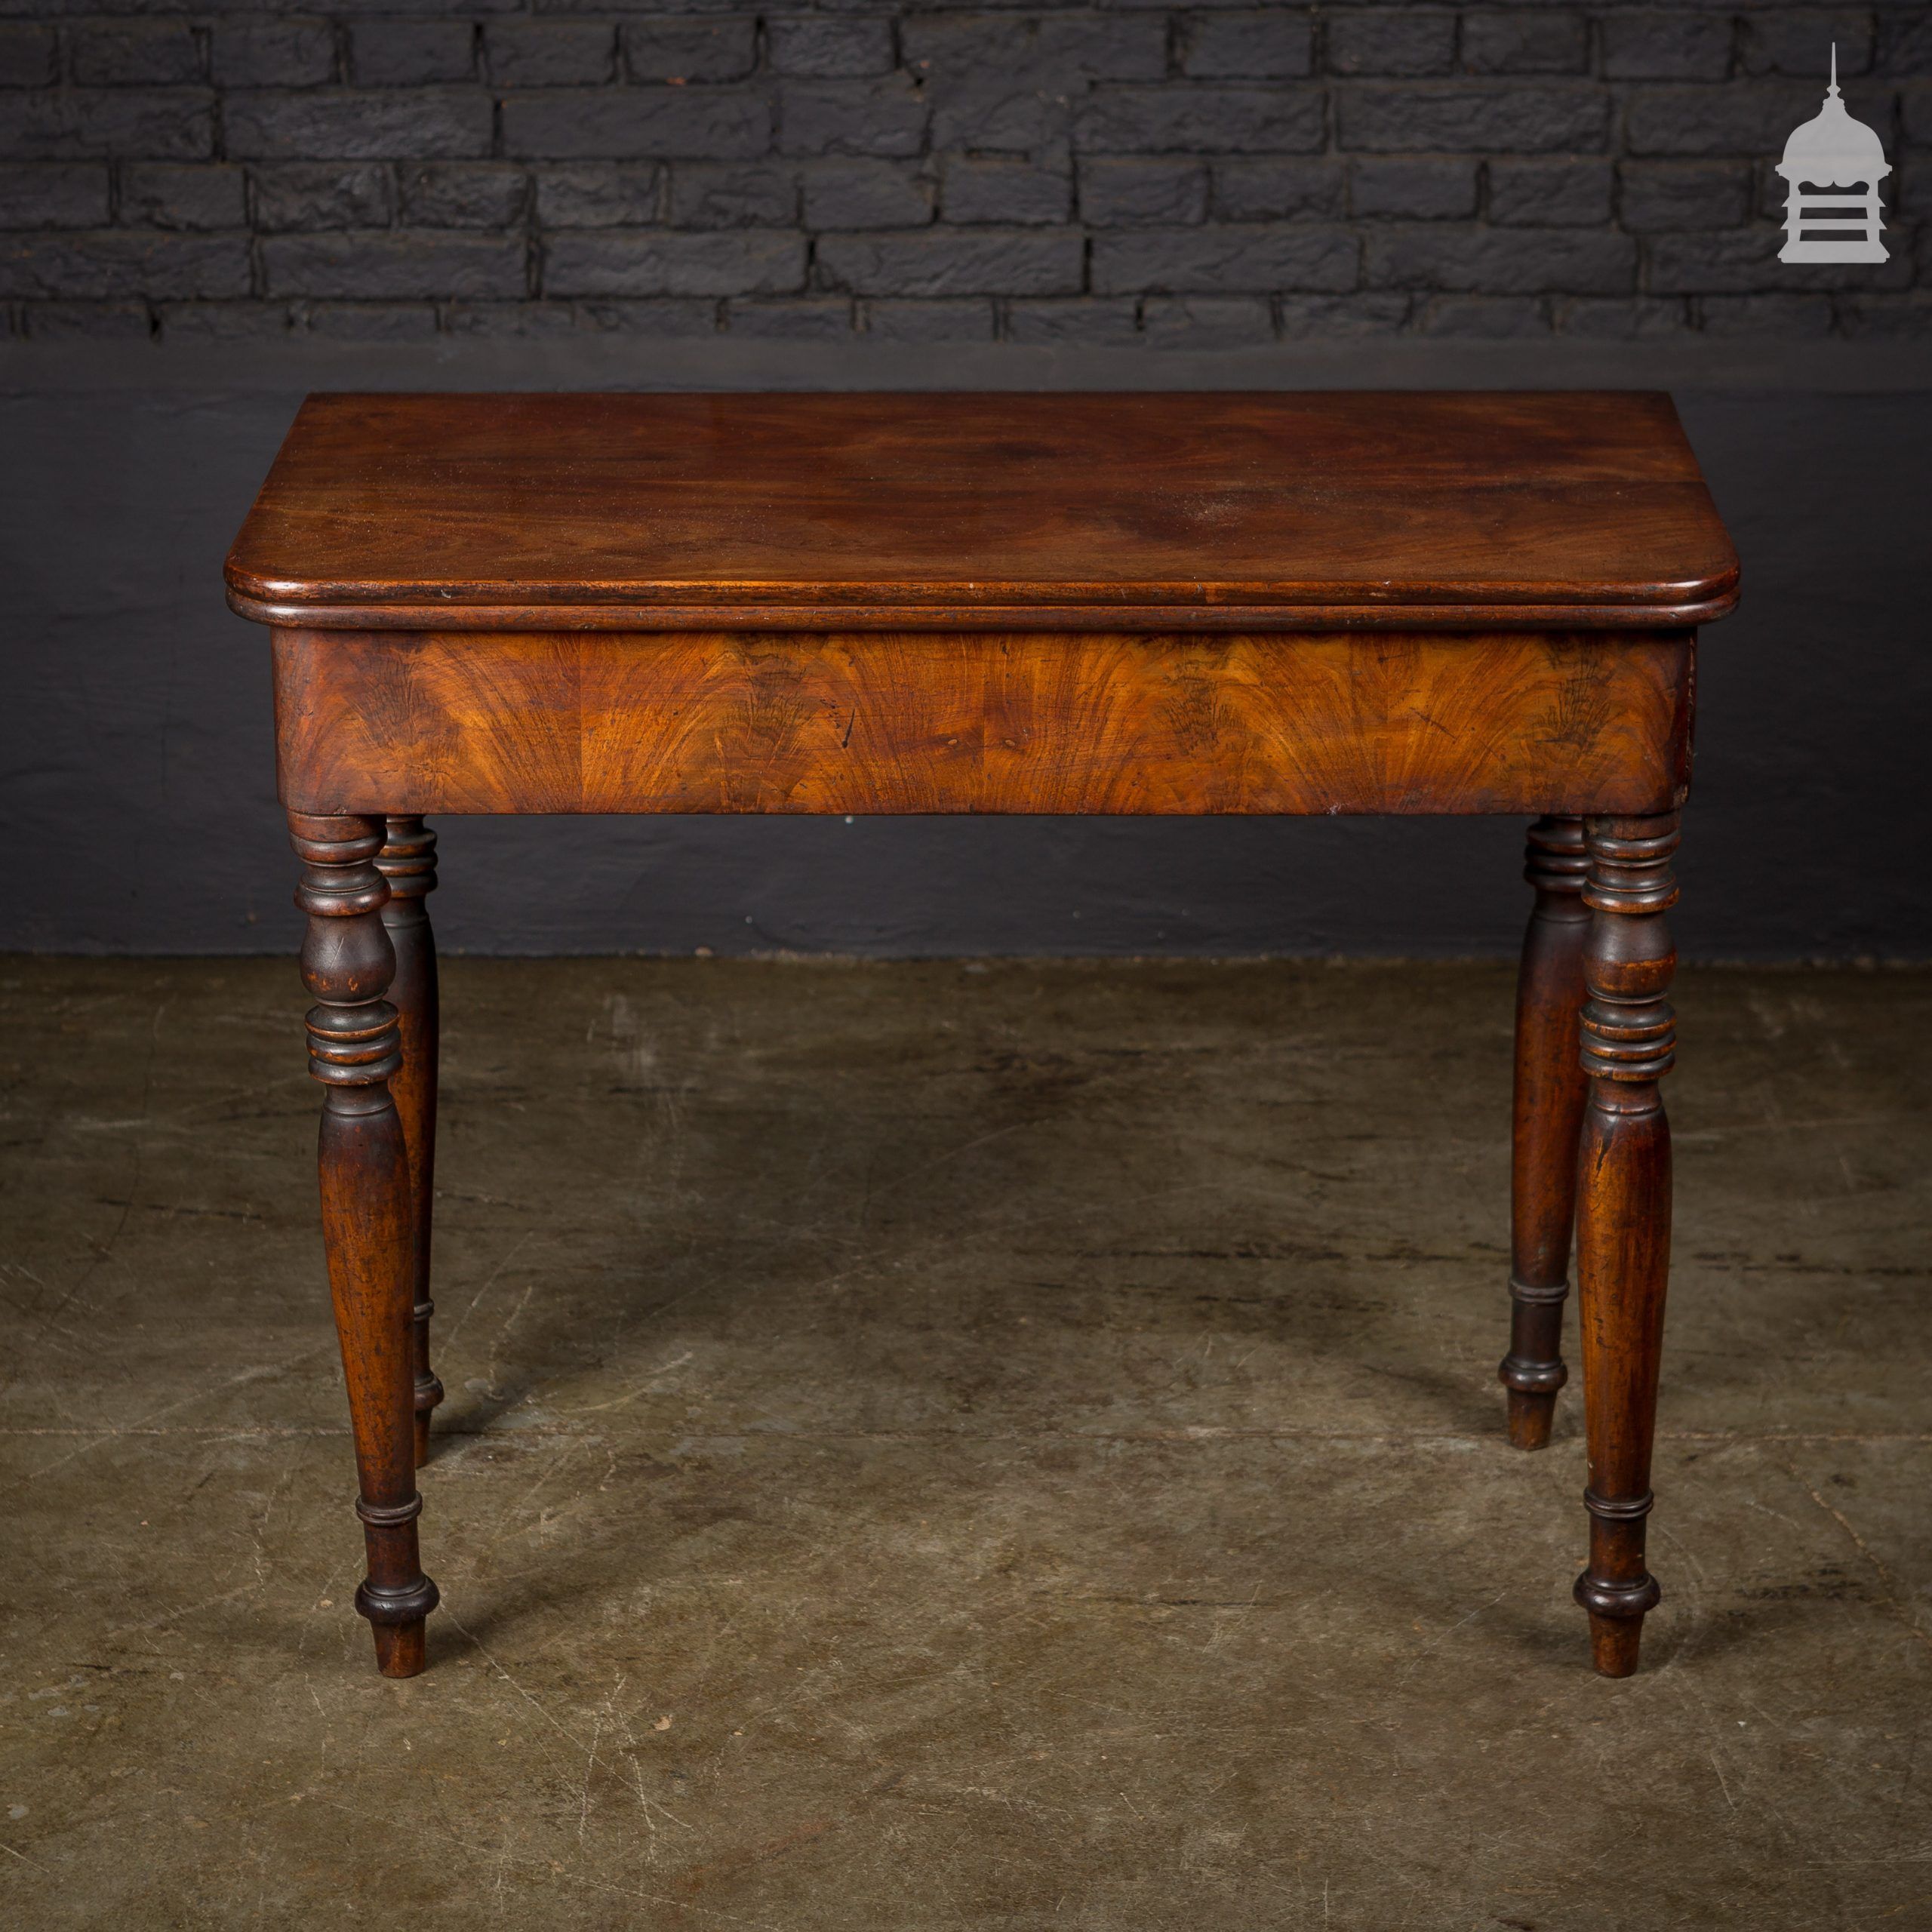 19th C Cuban Mahogany Swivel Top Fold Out Table With Turned Legs In Widely Used Antique Foldout Console Tables (View 8 of 15)